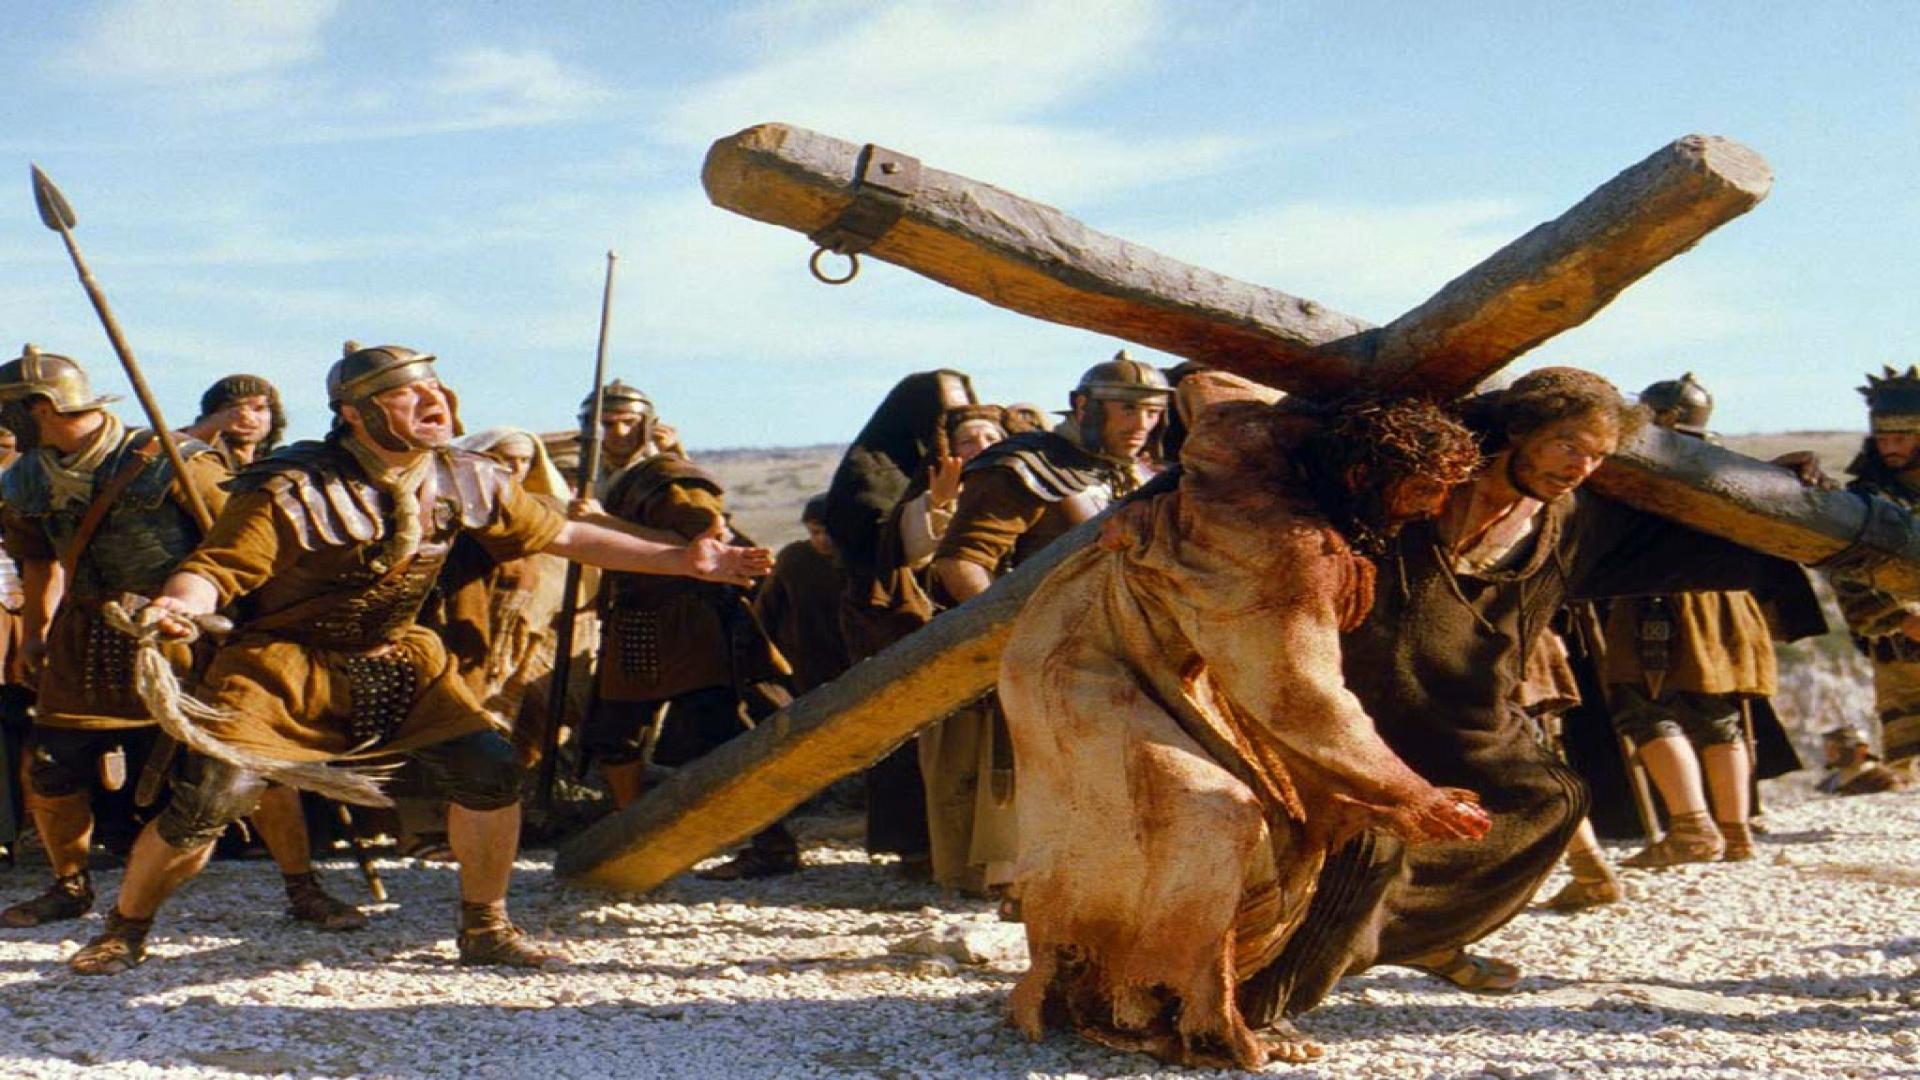 Passion Of The Christ Image Wallpaper 1920×1080 - God HD Wallpapers